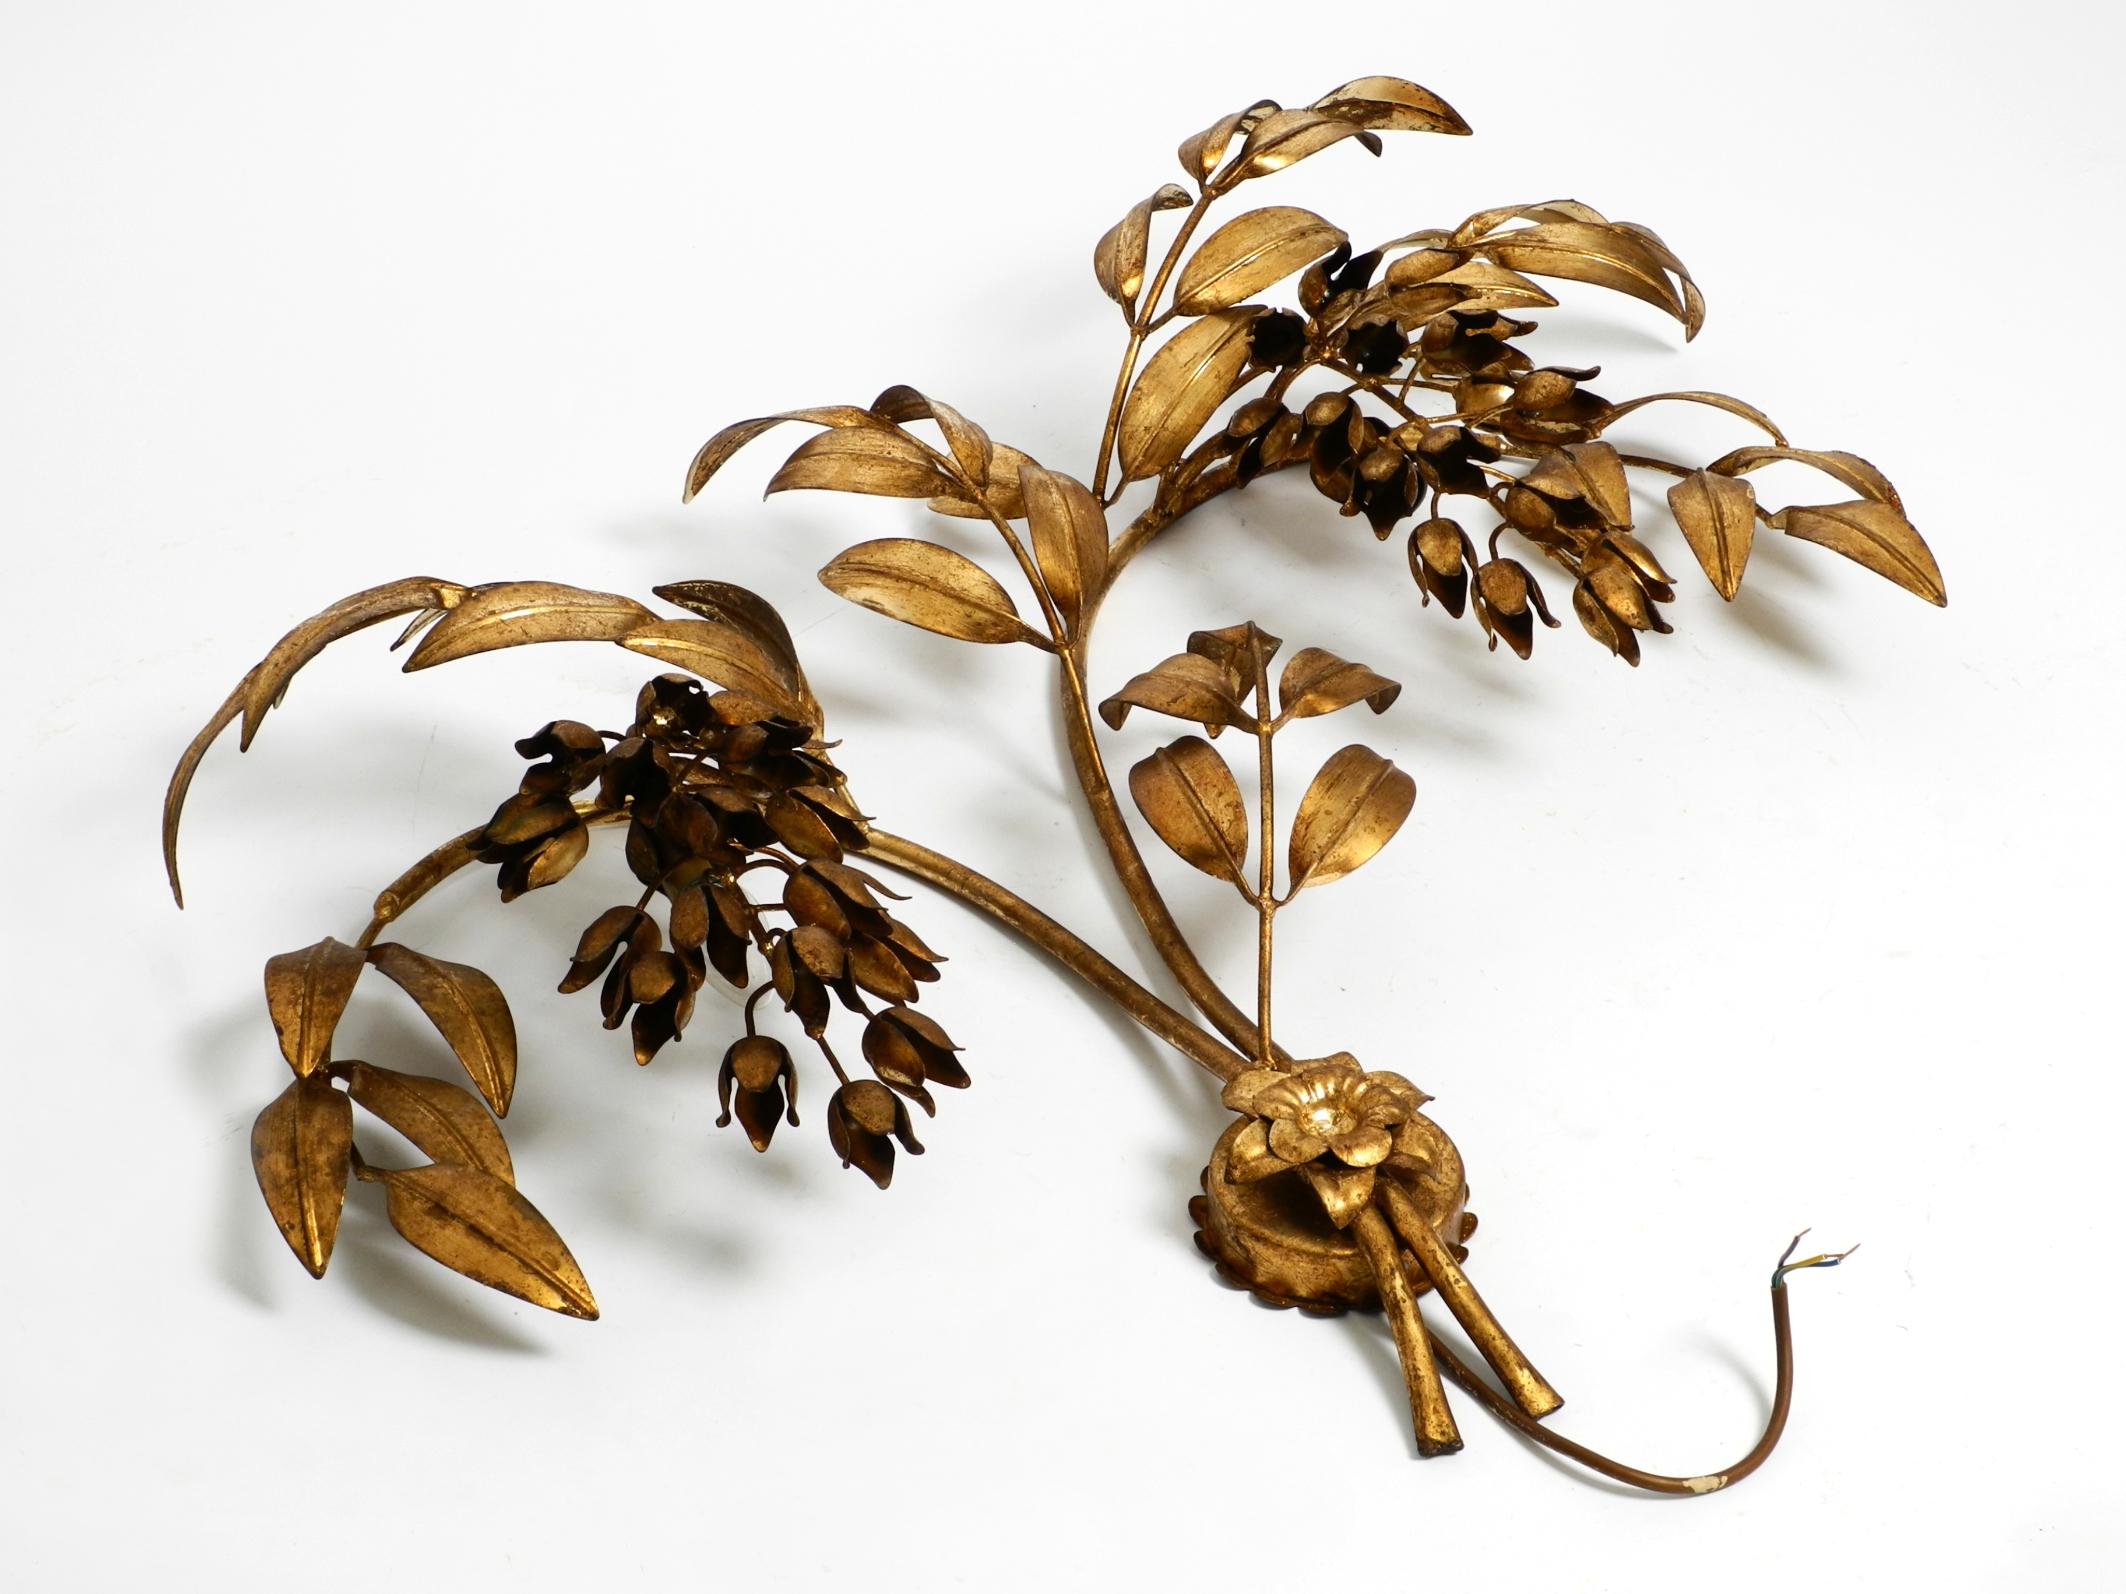 Large beautiful 1970s gold plated floral wall lamp.
Design by Hans Kögl, model Wisteria. Very old production. Bought from first owner.
Beautiful design with lots of details.
Many large leaves with curved stems. Very high quality workmanship.
Entire